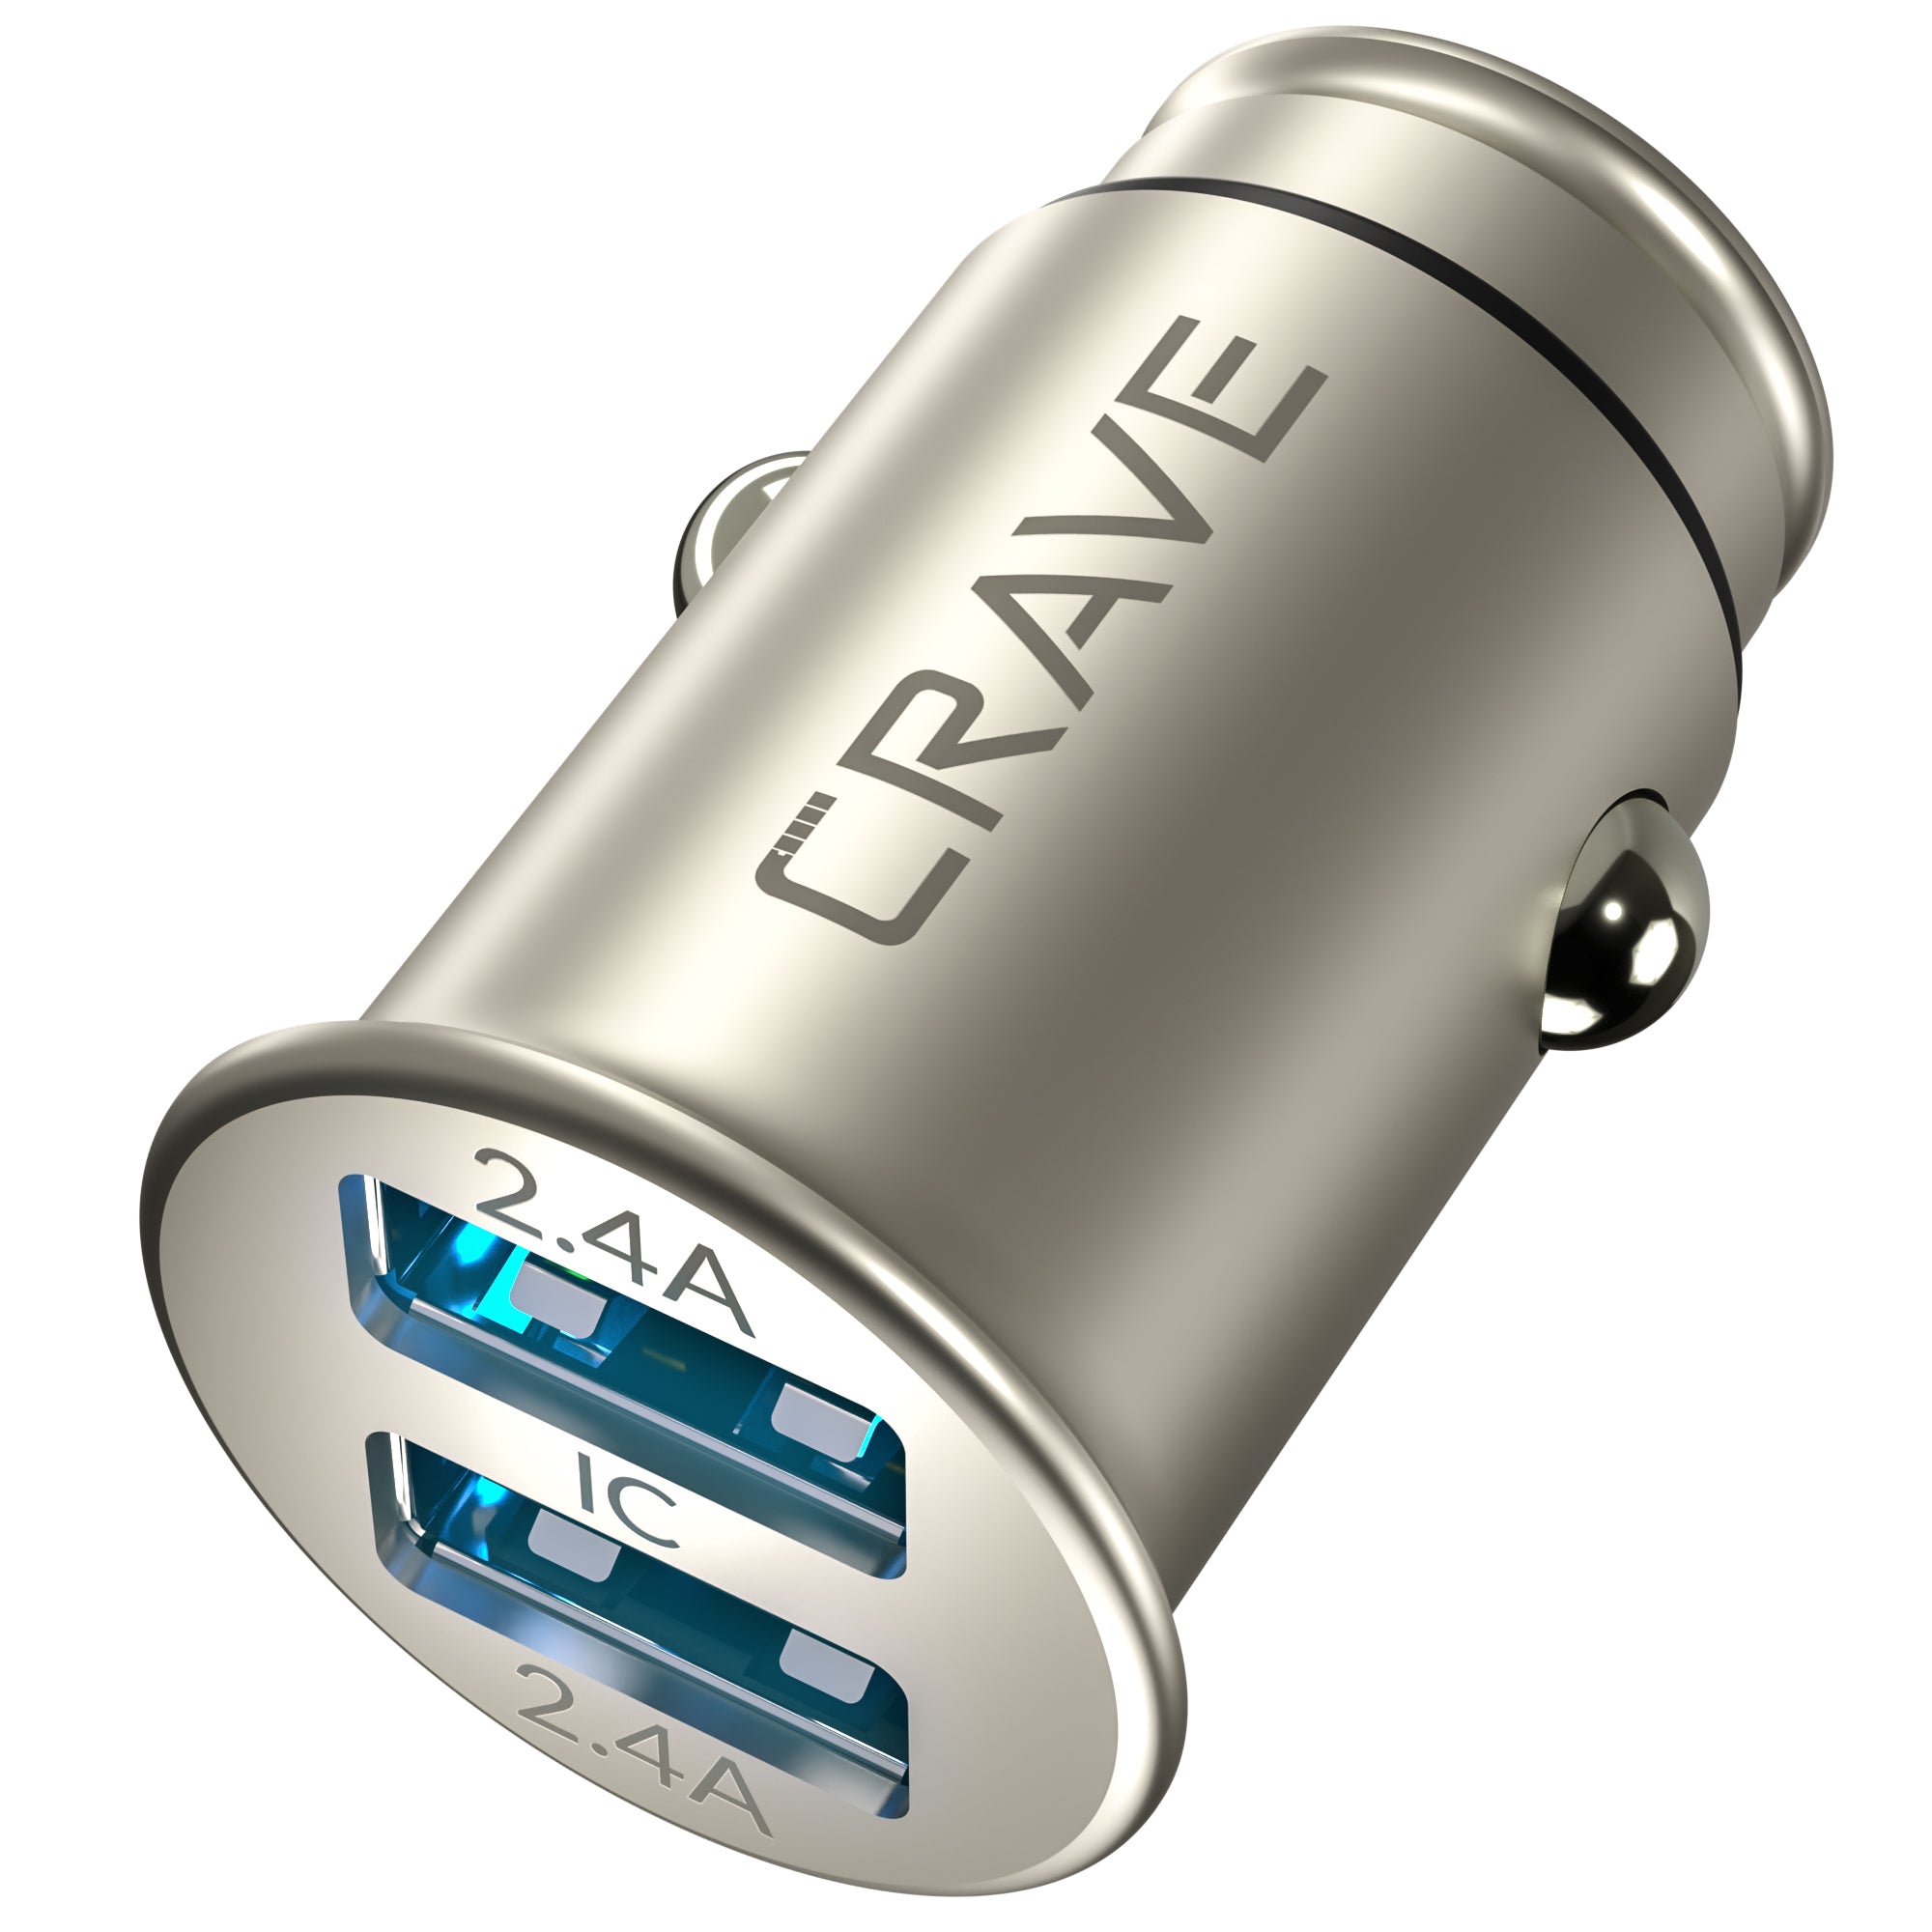 Crave Bullet Car Charger - Buy 2 Get 1 Free